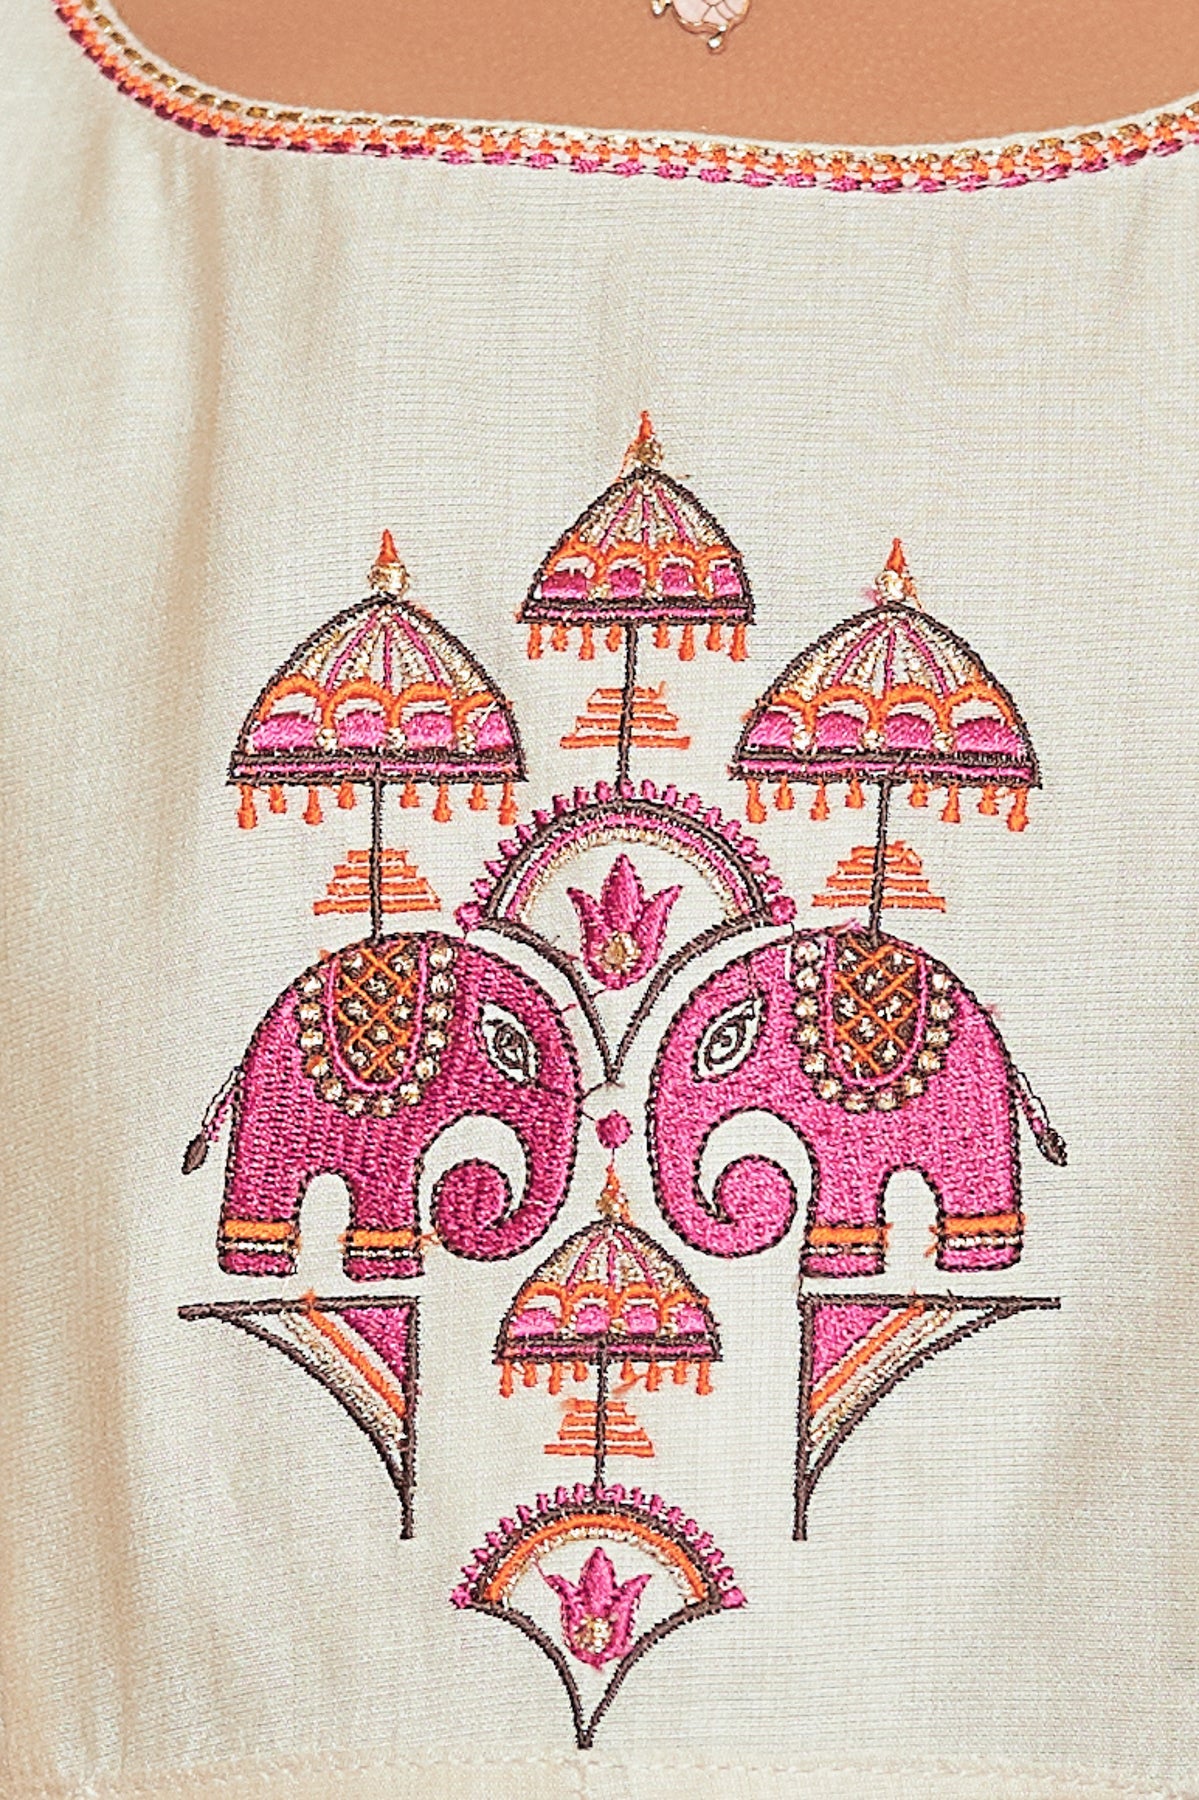 Elephant Motif Placement Embroidered & Printed Anarkali - Off-White